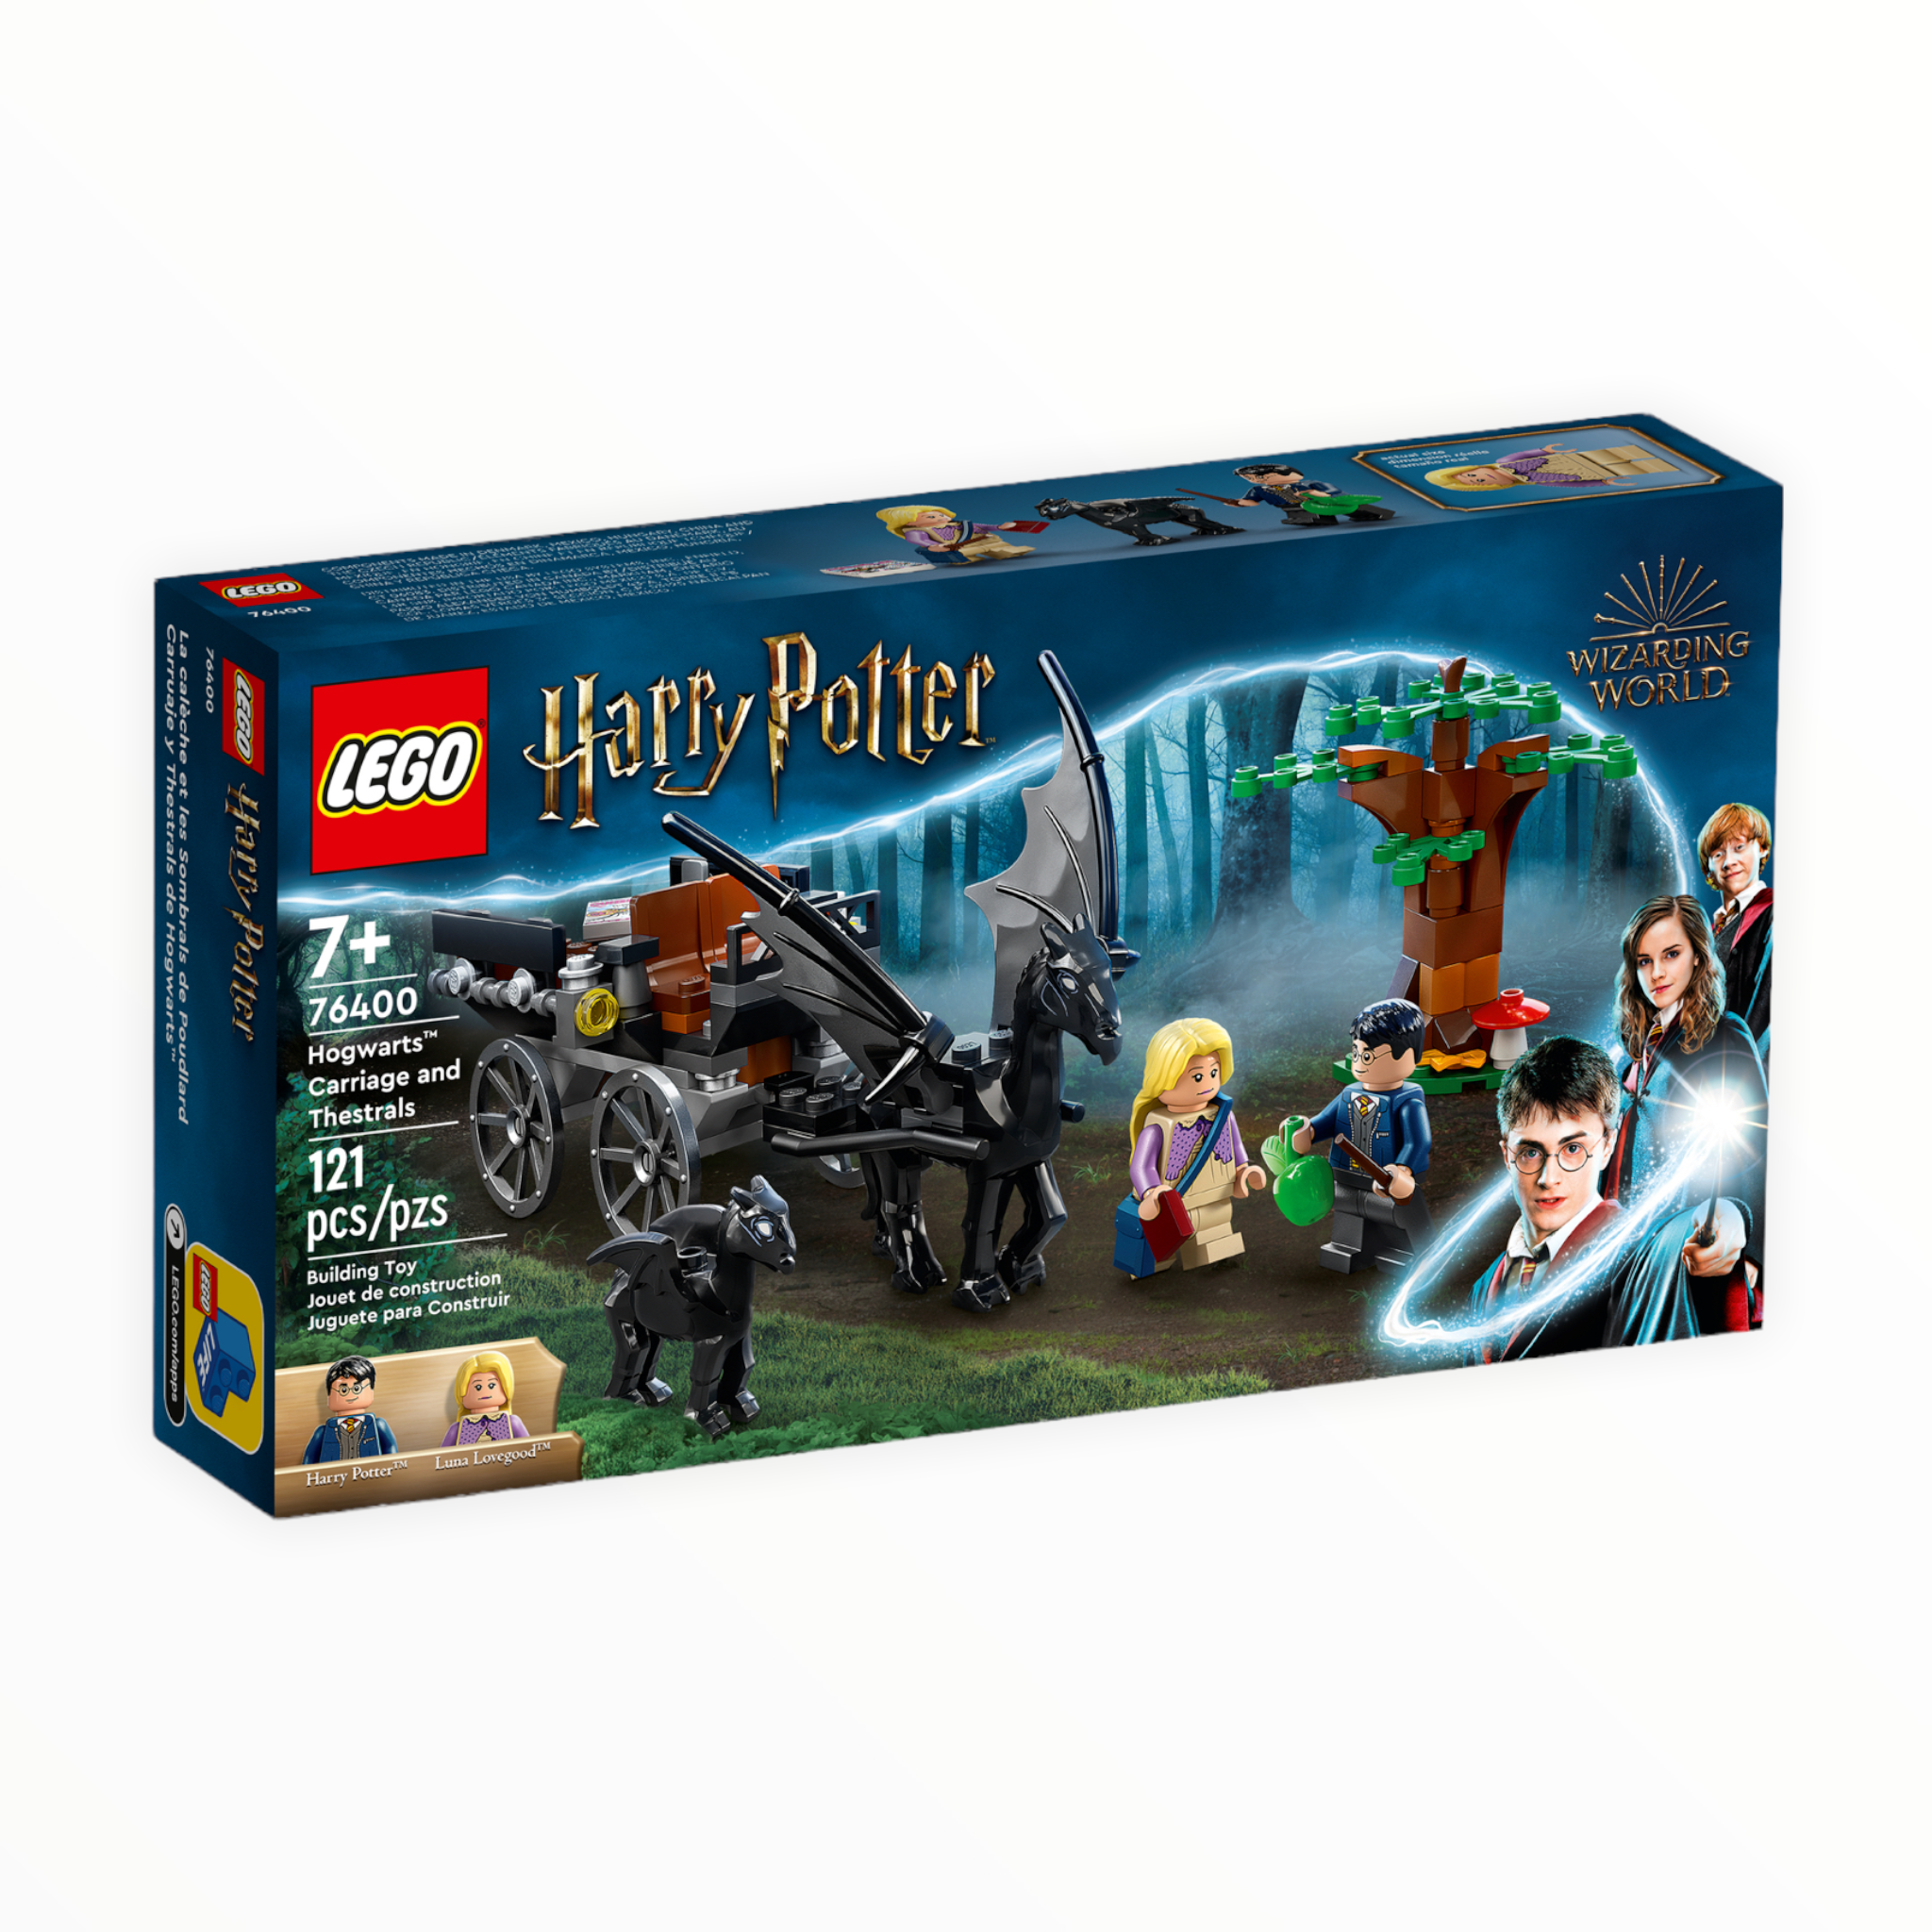 76400 Harry Potter Hogwarts Carriage and Thestrals